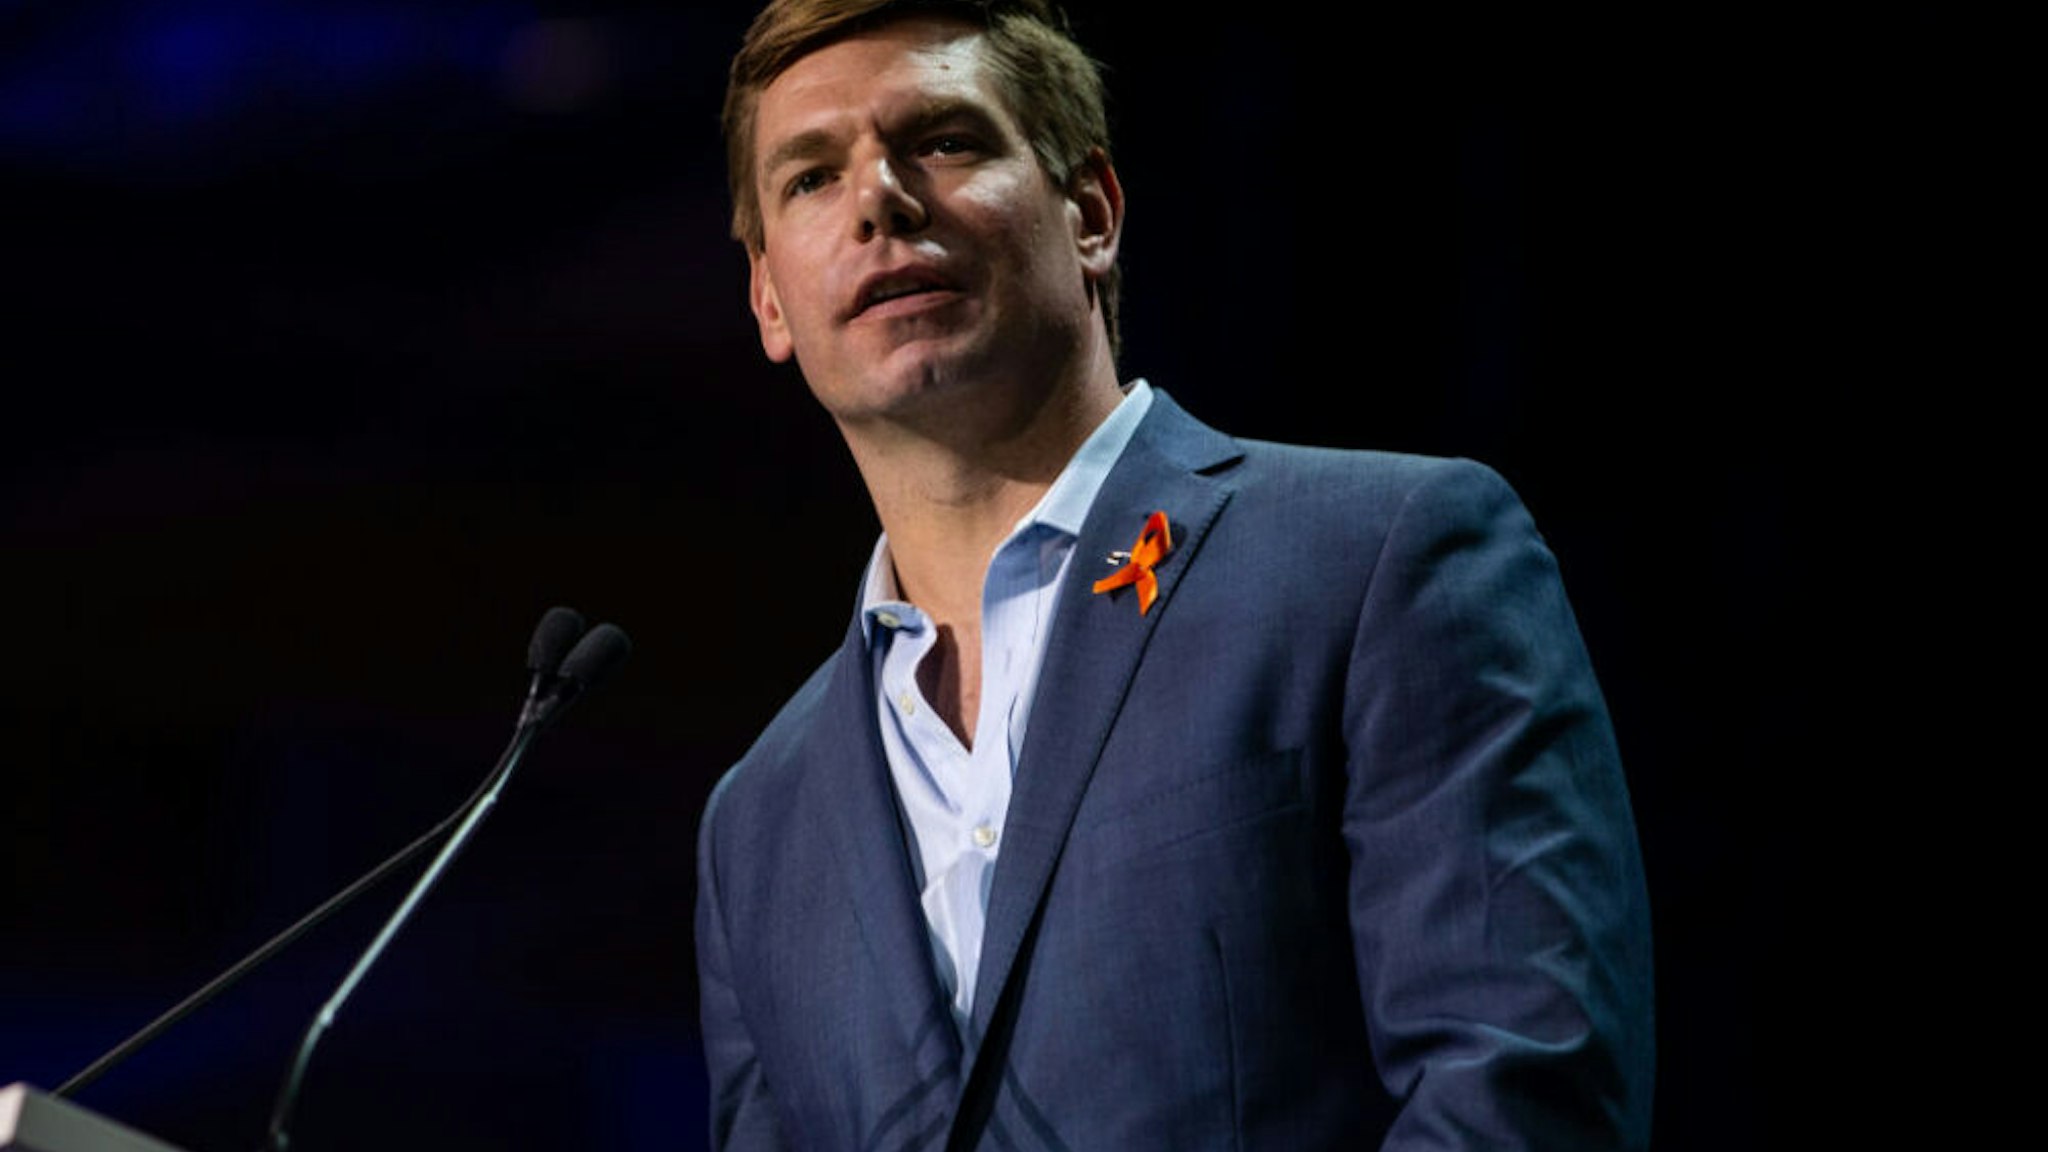 SAN FRANCISCO, CALIF. - JUNE 01: U.S. Rep Eric Swalwell speaks during the 2019 California State Democratic Party Convention at Moscone Center on Saturday, June 1, 2019 in San Francisco, Calif.